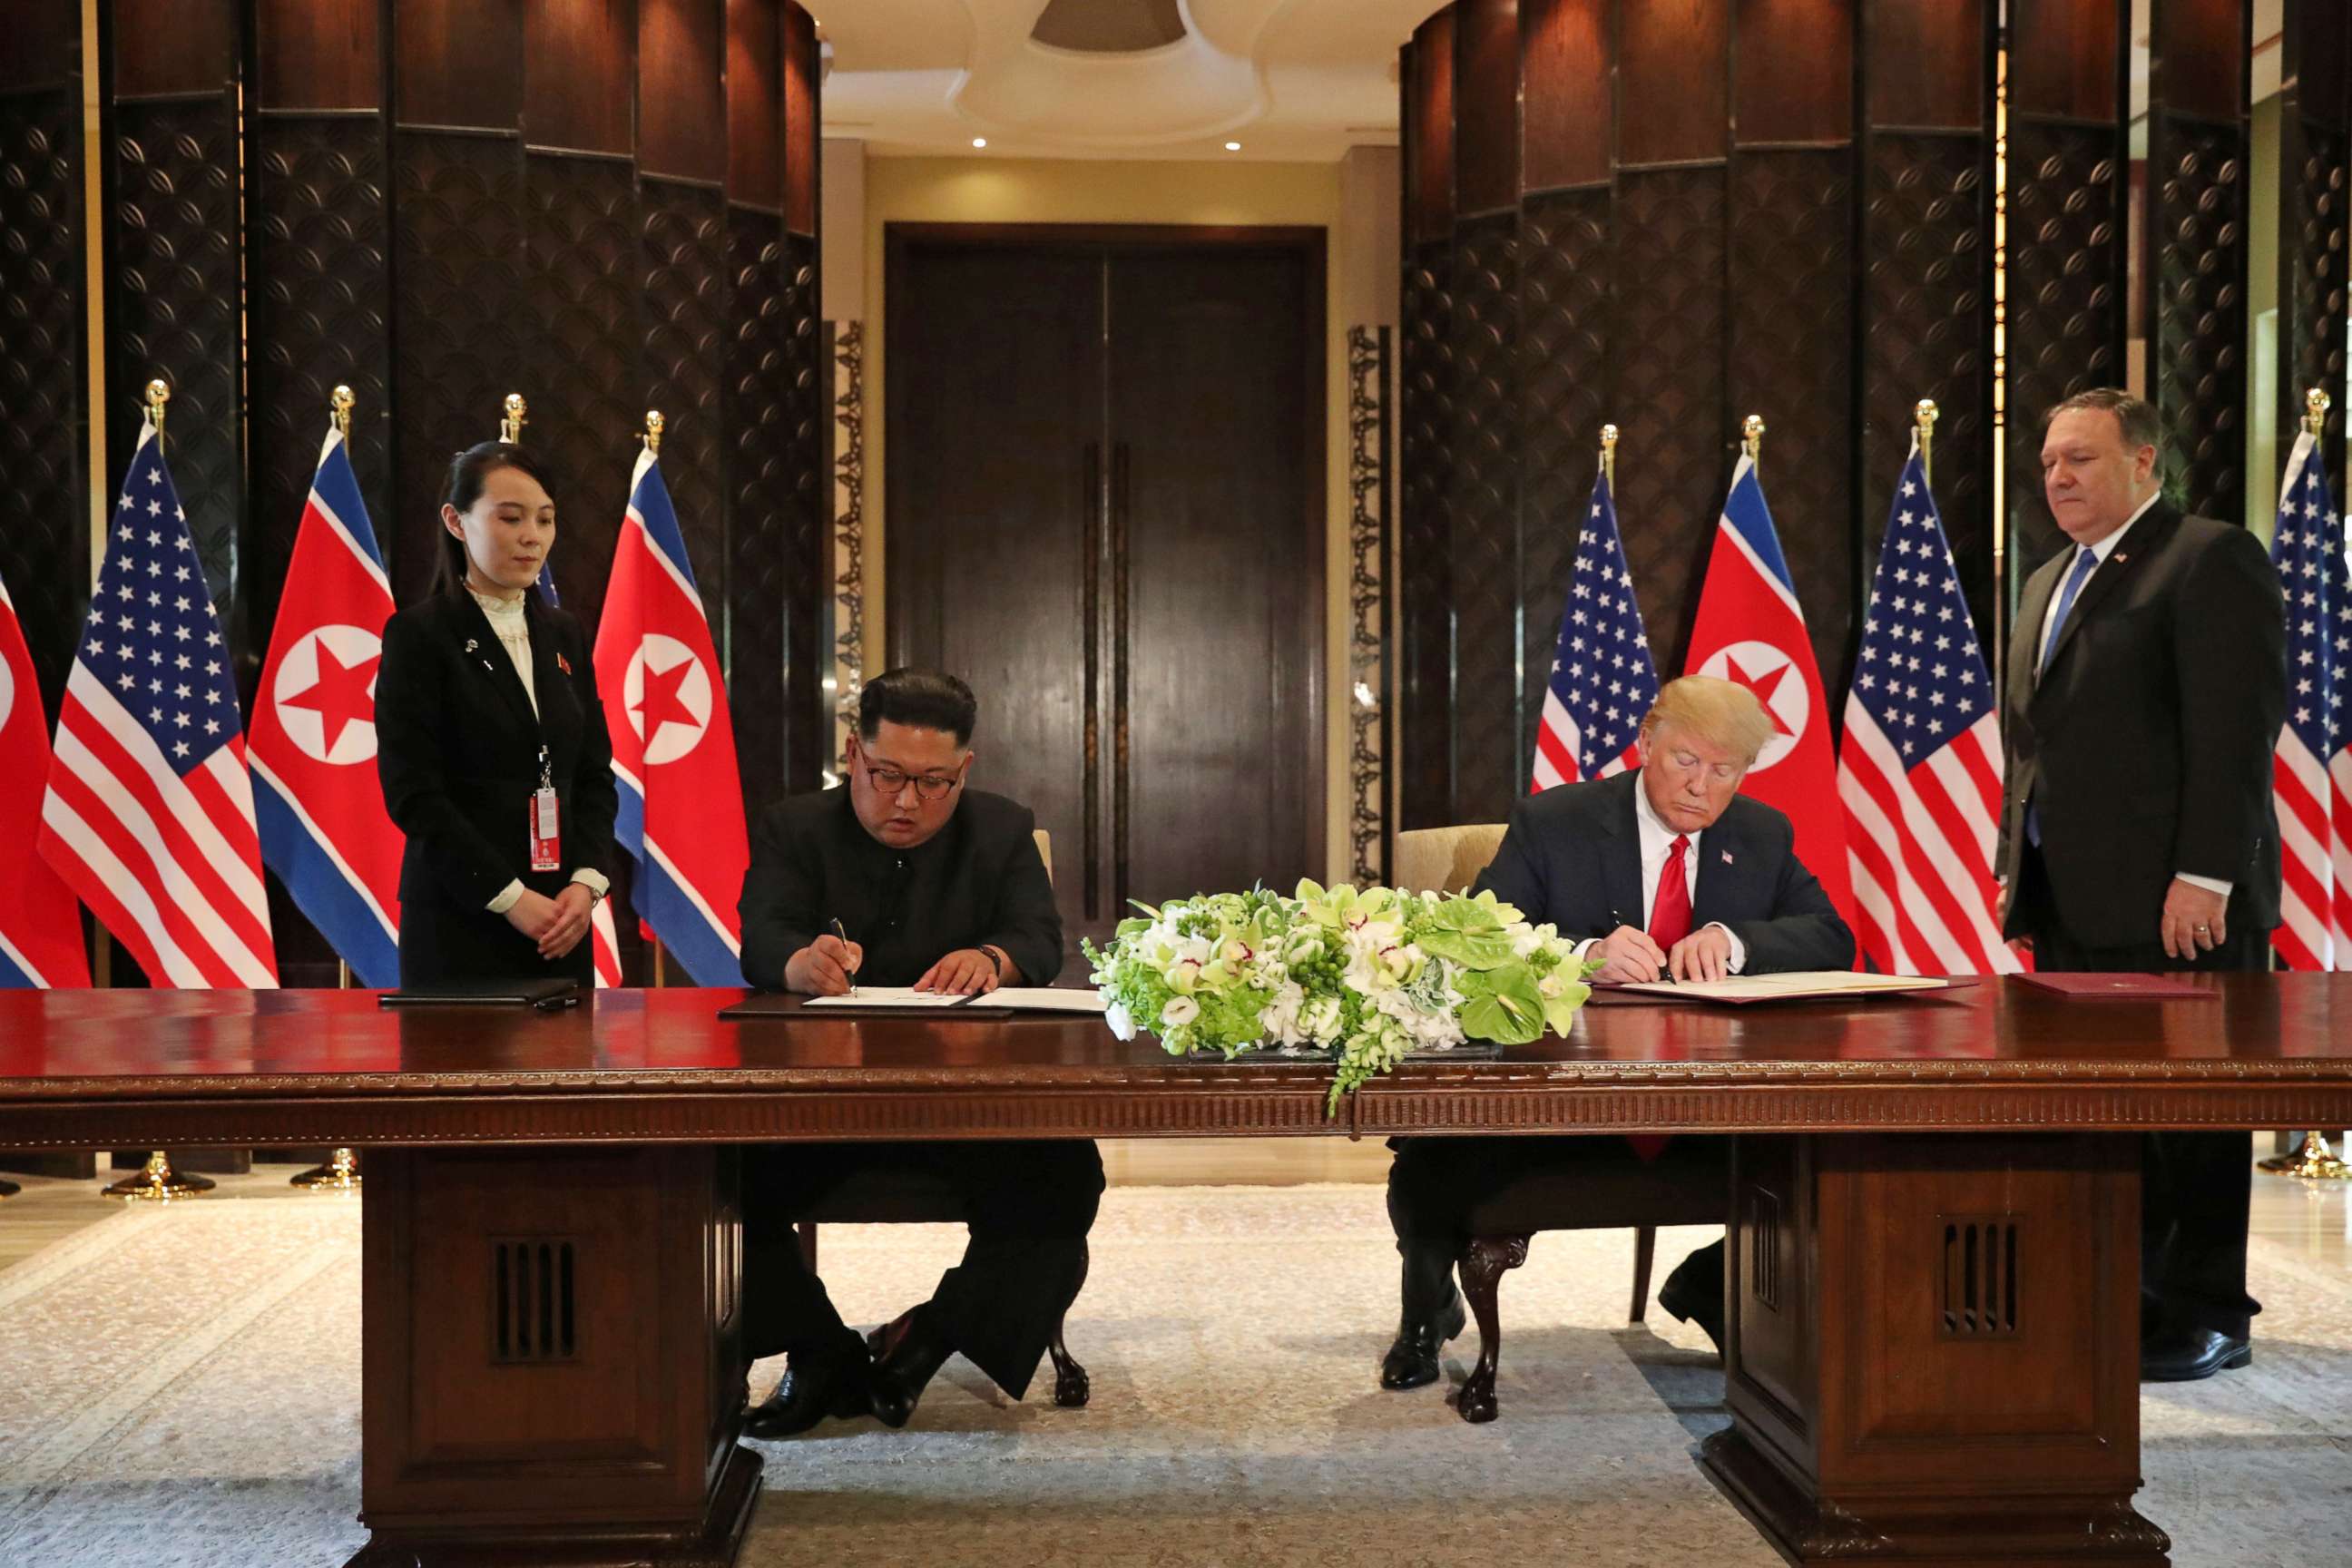 PHOTO: President Donald Trump and North Korea's leader Kim Jong Un sign documents that acknowledge the progress of the talks and pledge to keep momentum going, after their summit at the Capella Hotel on Sentosa island in Singapore June 12, 2018.